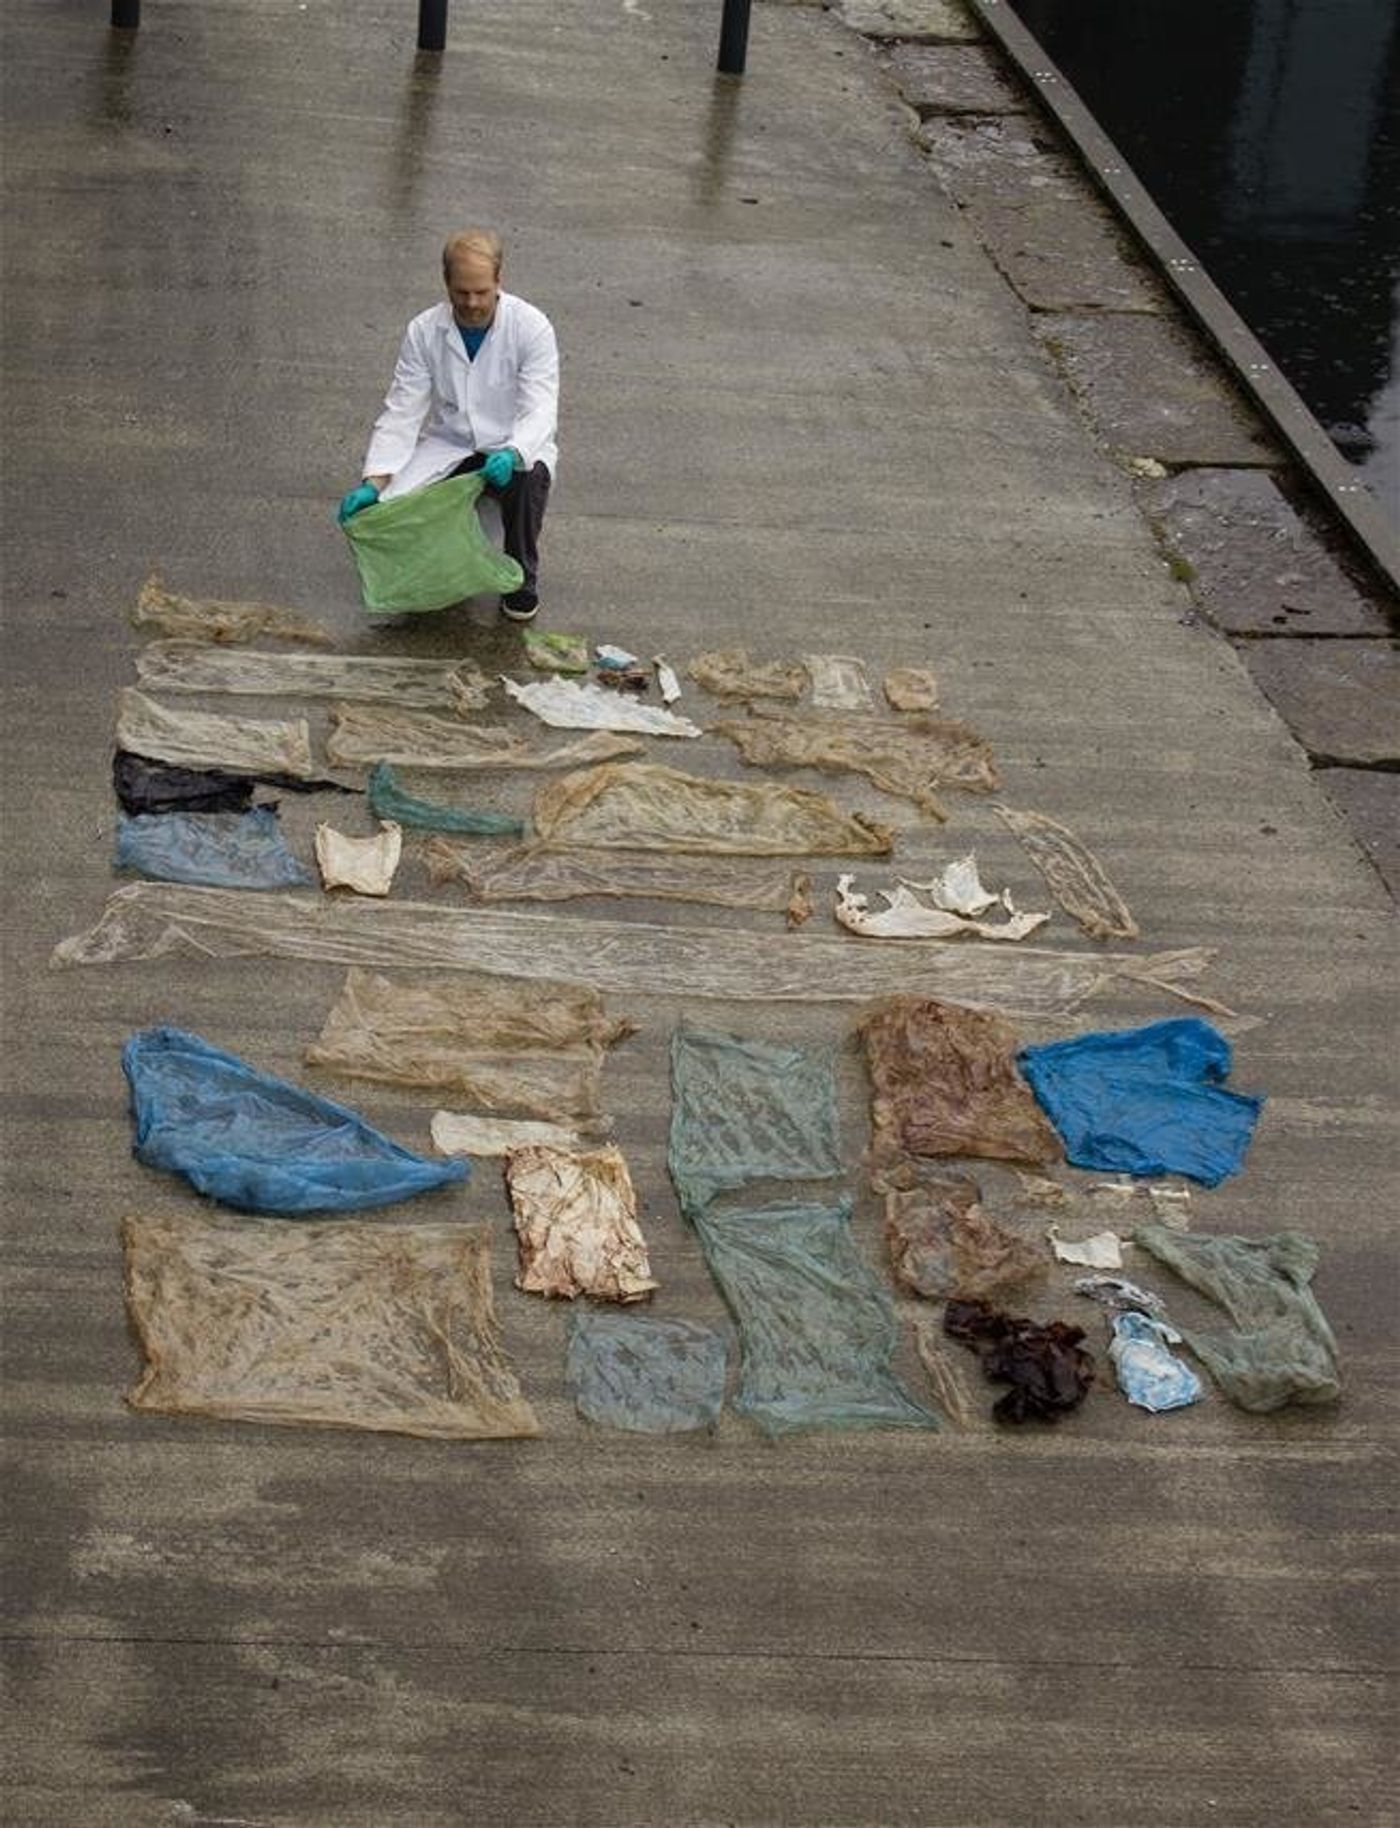 The numerous plastic bags that were pulled from the euthanized whale's stomach.